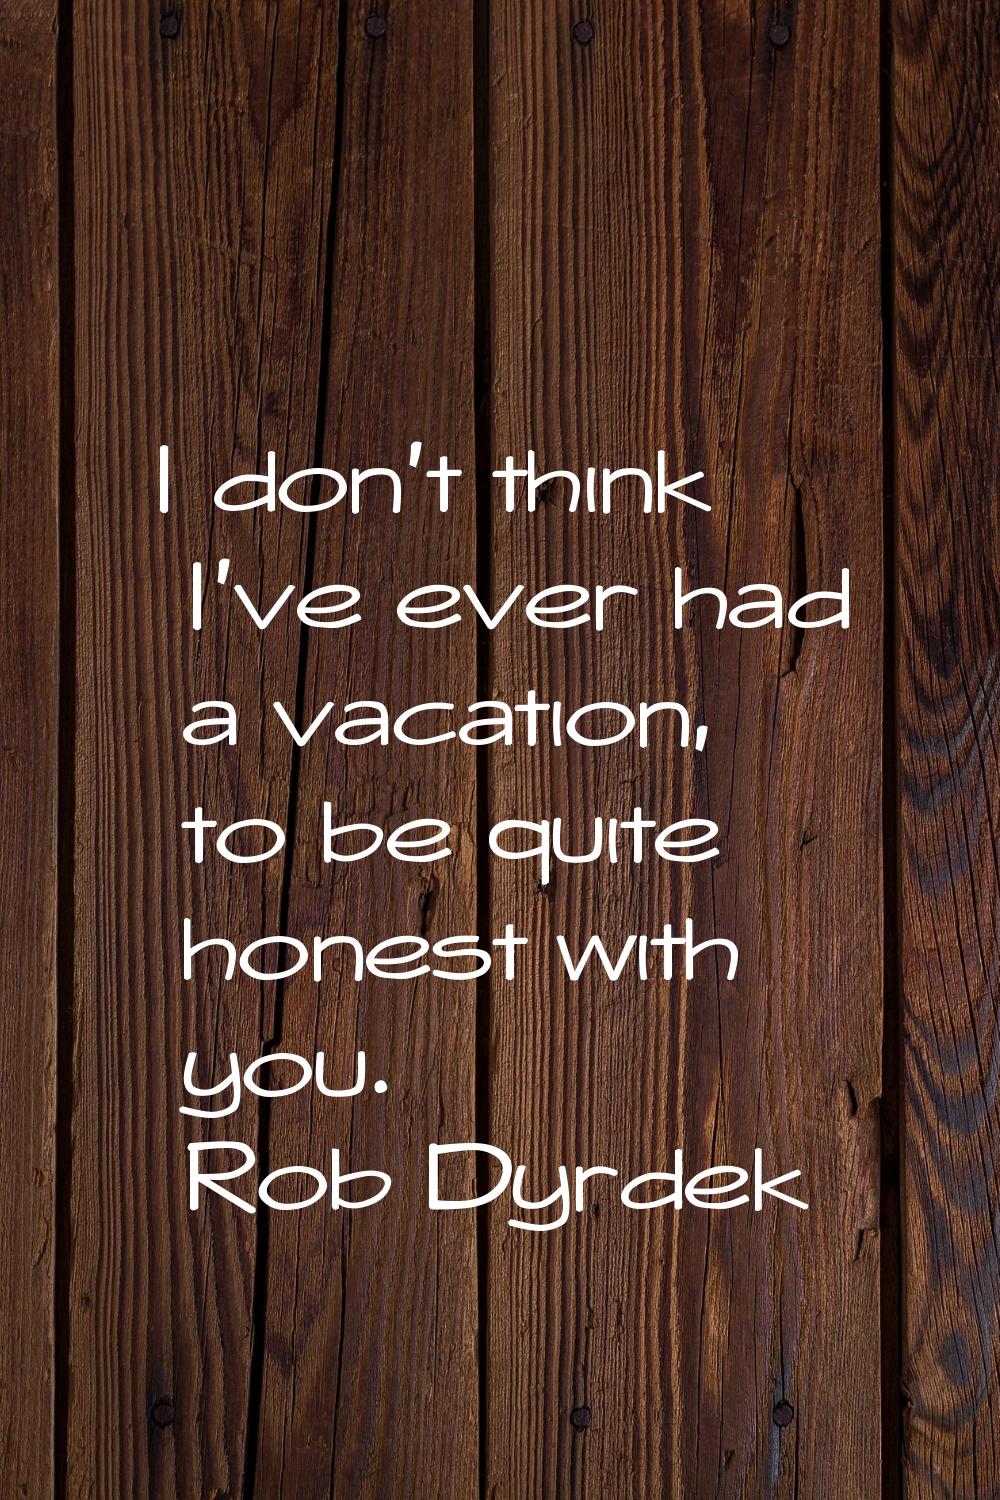 I don't think I've ever had a vacation, to be quite honest with you.